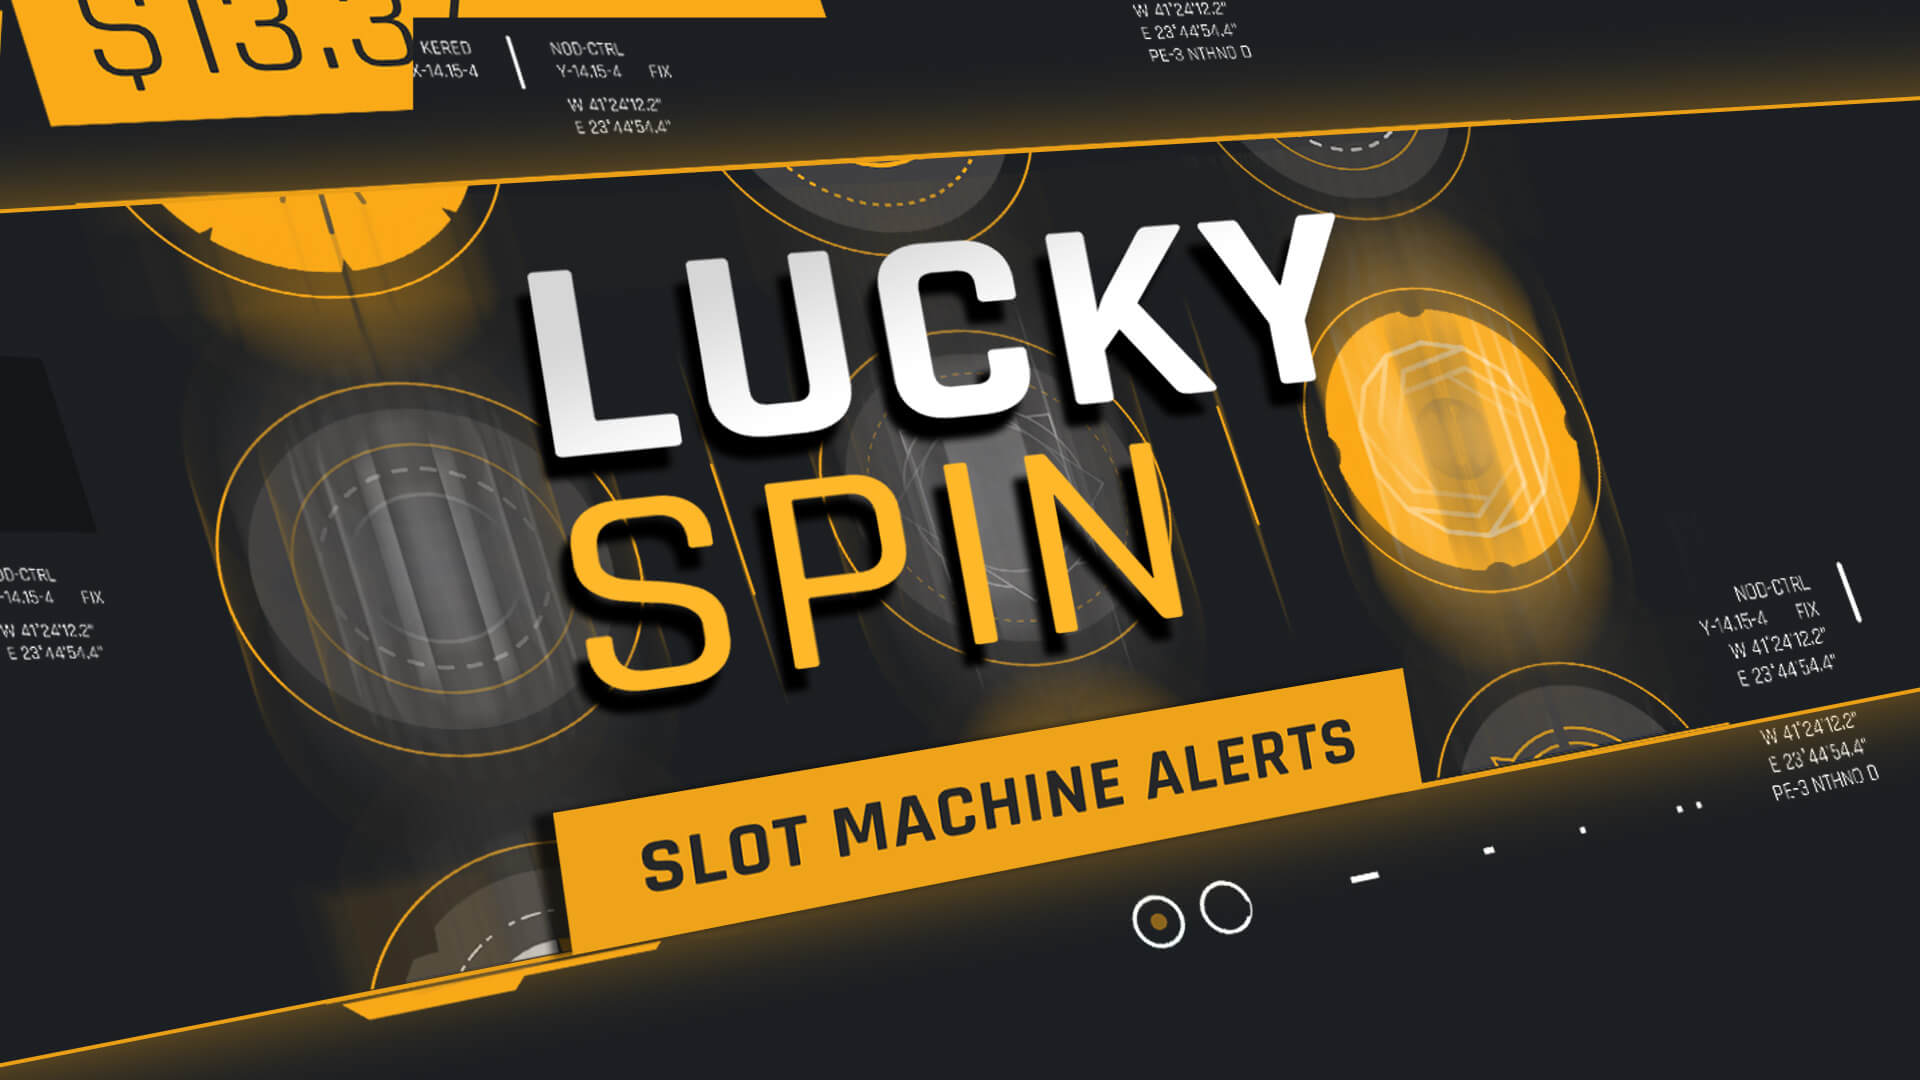 Lucky Spin - Slot Machine Alerts - Main Image